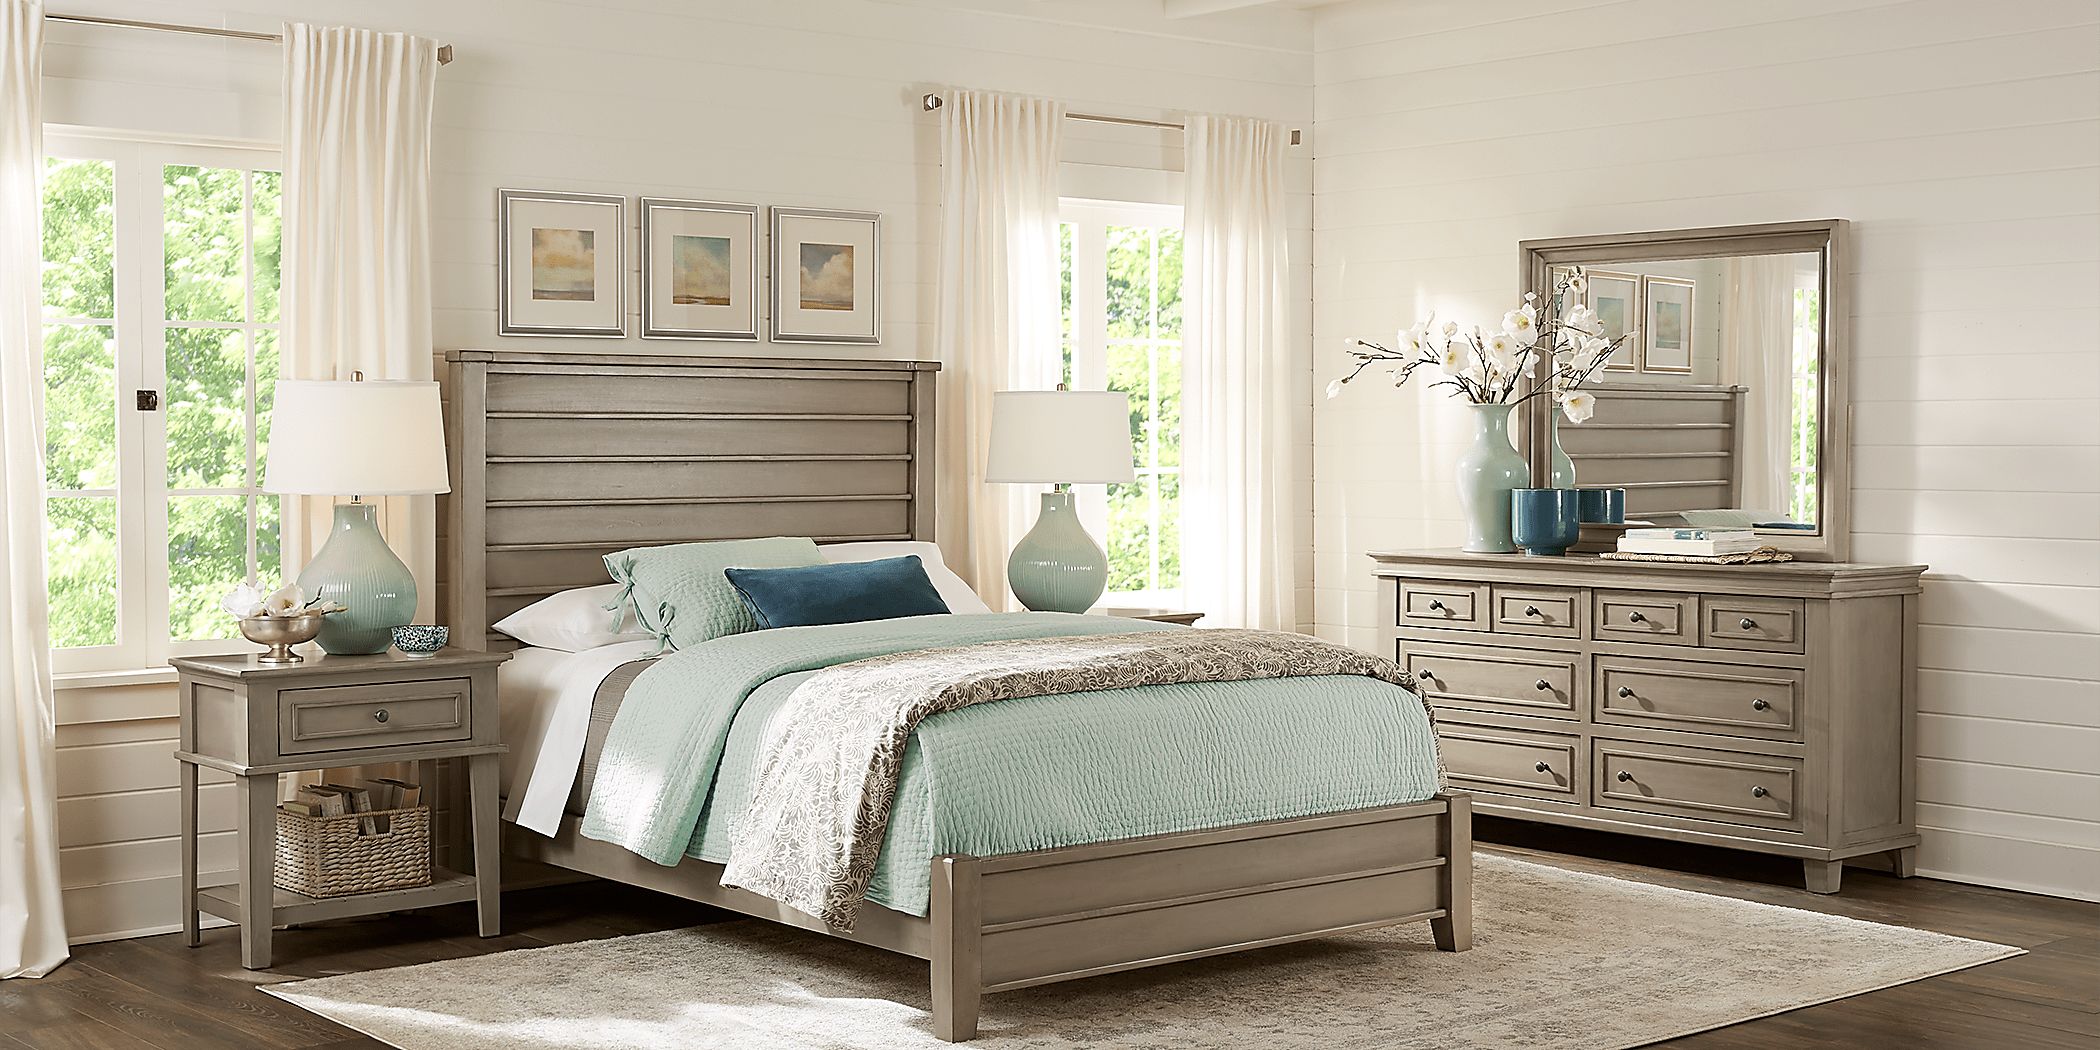 https://assets.roomstogo.com/product/darby-brook-light-gray-5-pc-queen-bedroom_3211688P_image-room?cache-id=eabb0cf0a107b2e227efa61578f645a4